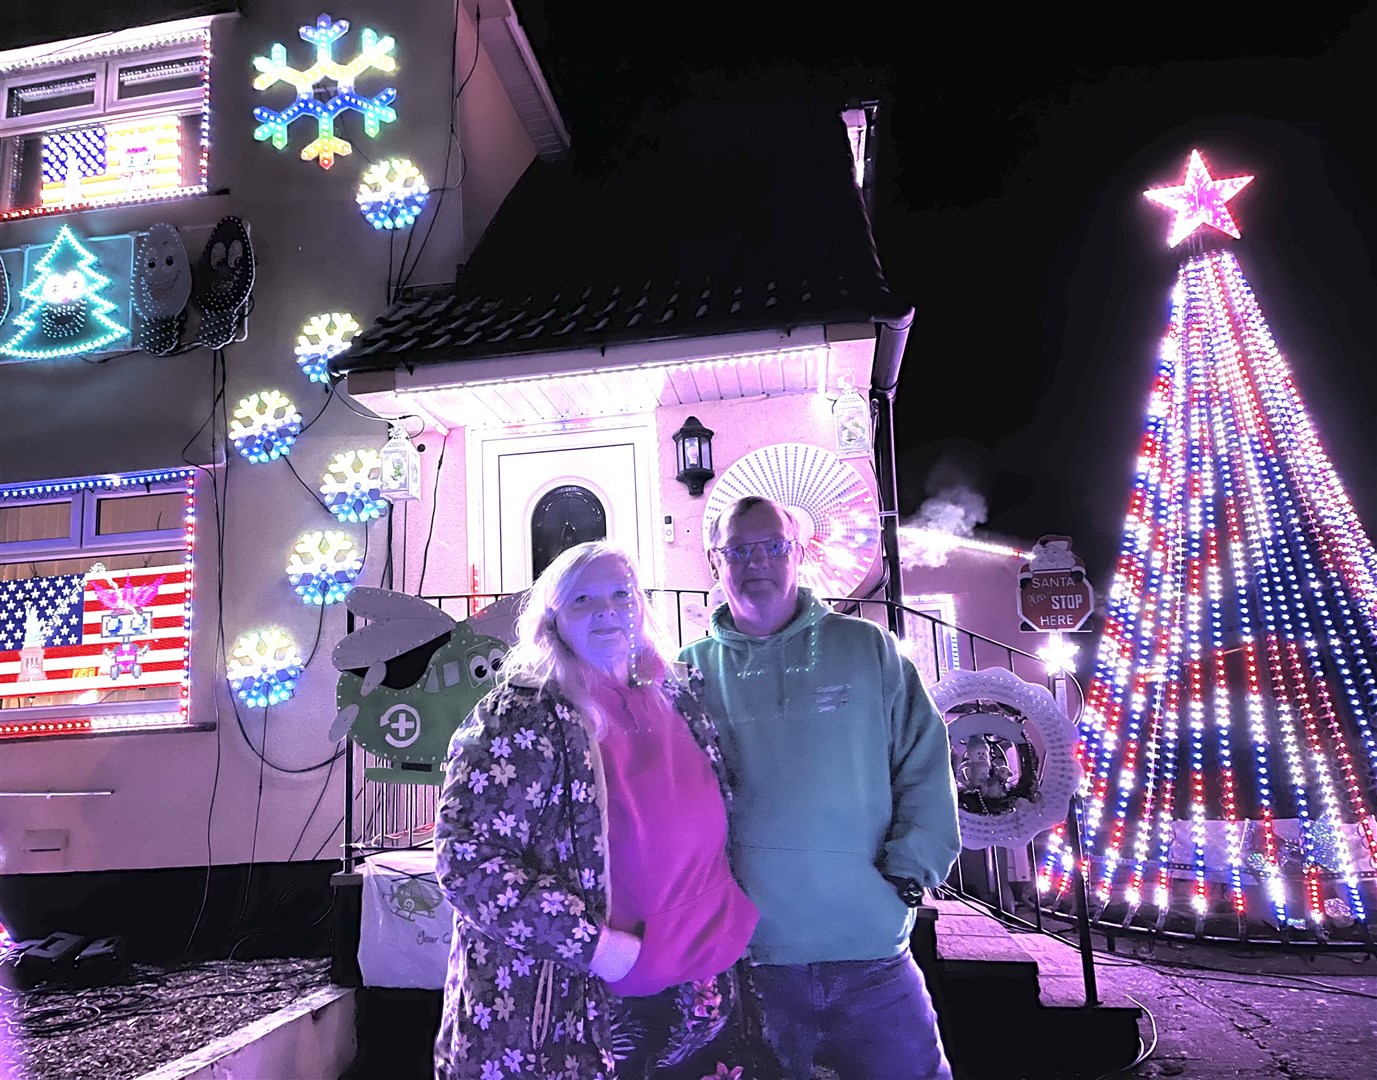 Ian and Ann Cooper transform their home in Bristol into a Christmas light show for the month of December (Ian Cooper/PA)